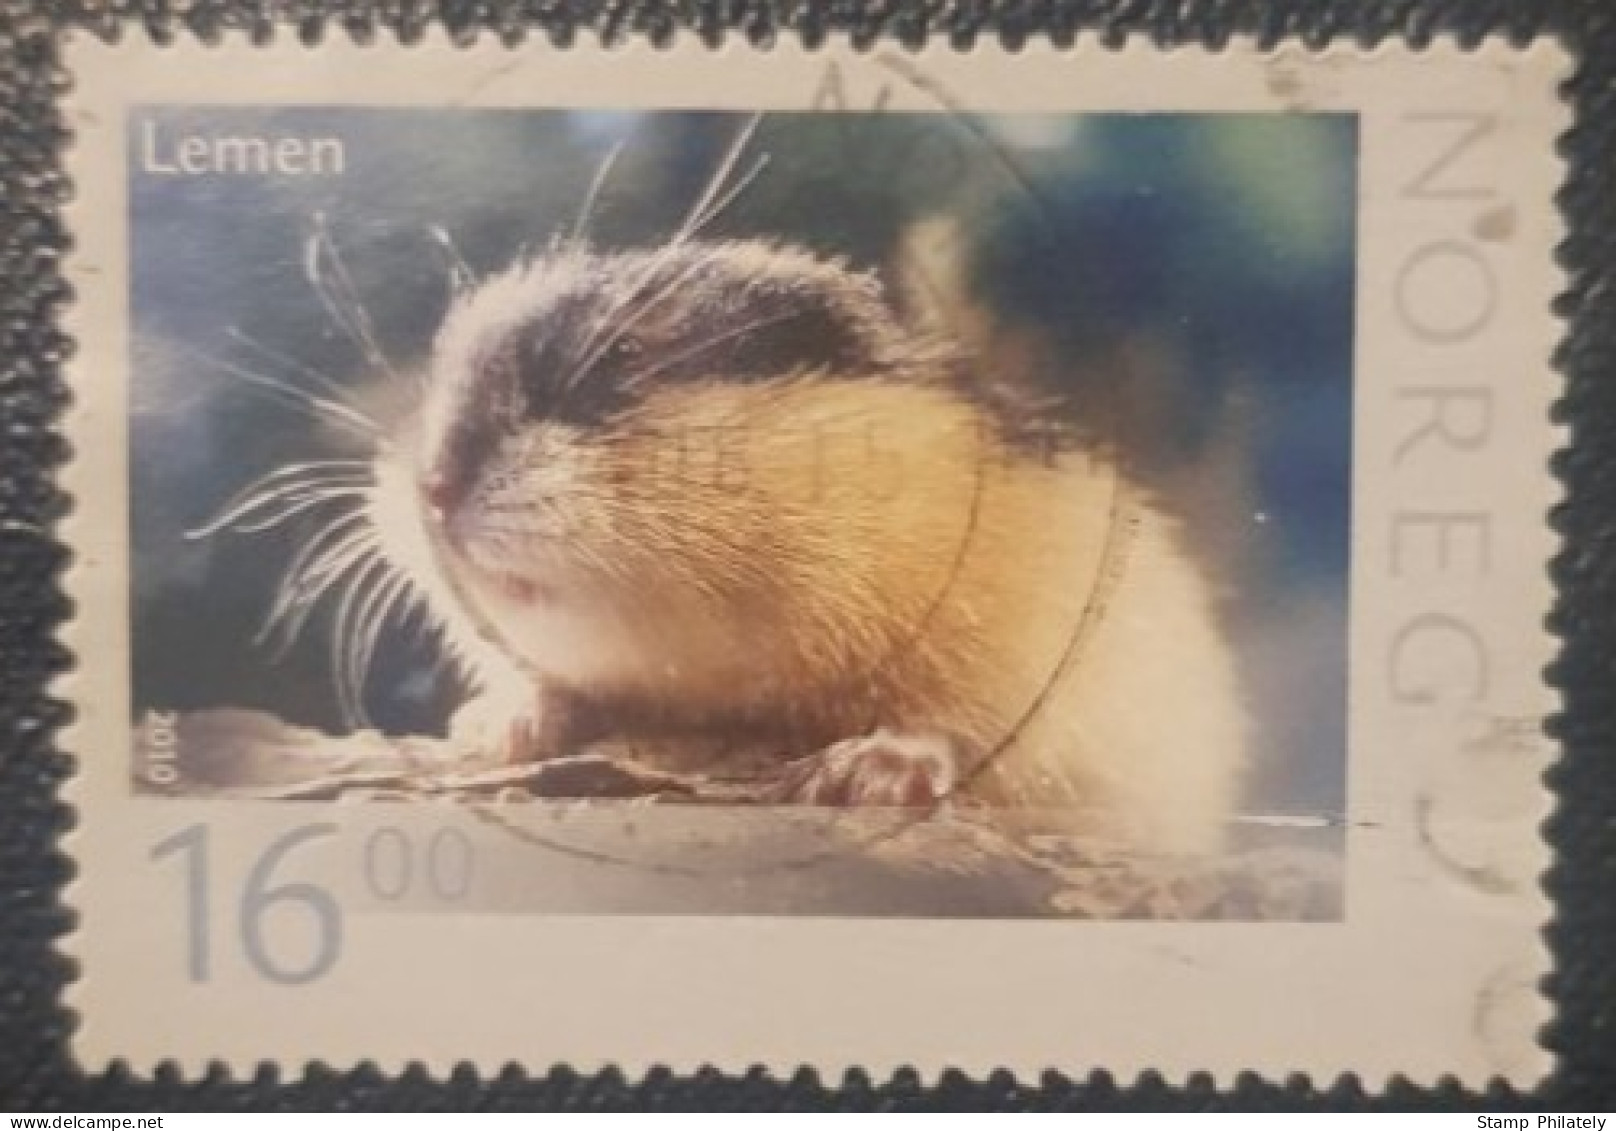 Norway 16Kr Used Stamp Local Fauna - Used Stamps